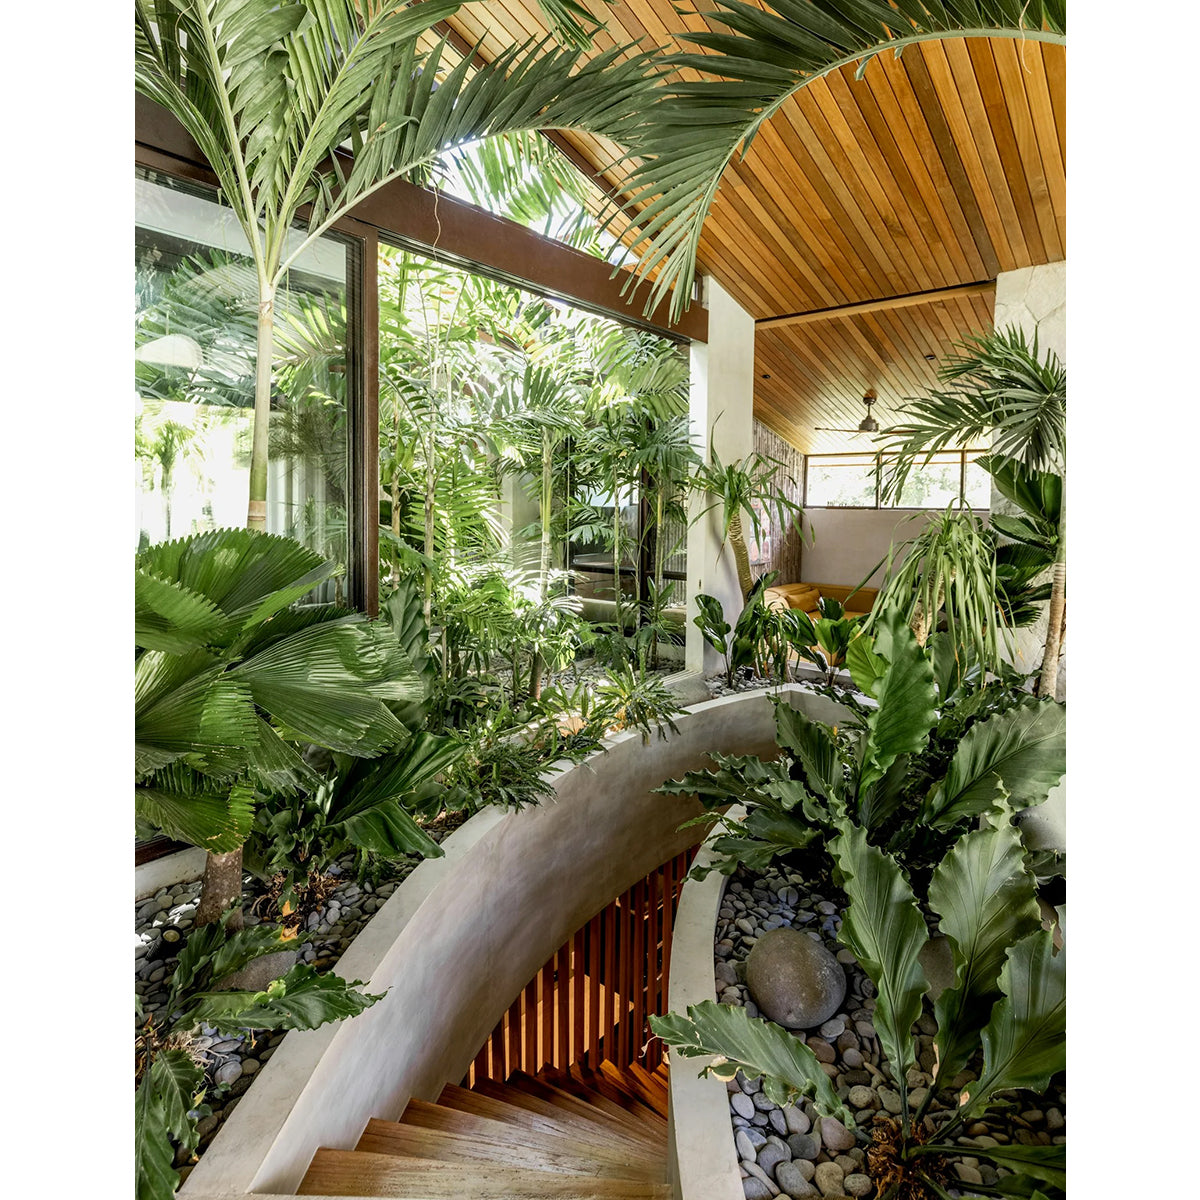 The House of Green, Natural Homes and Biophilic Architecture boek gestalten